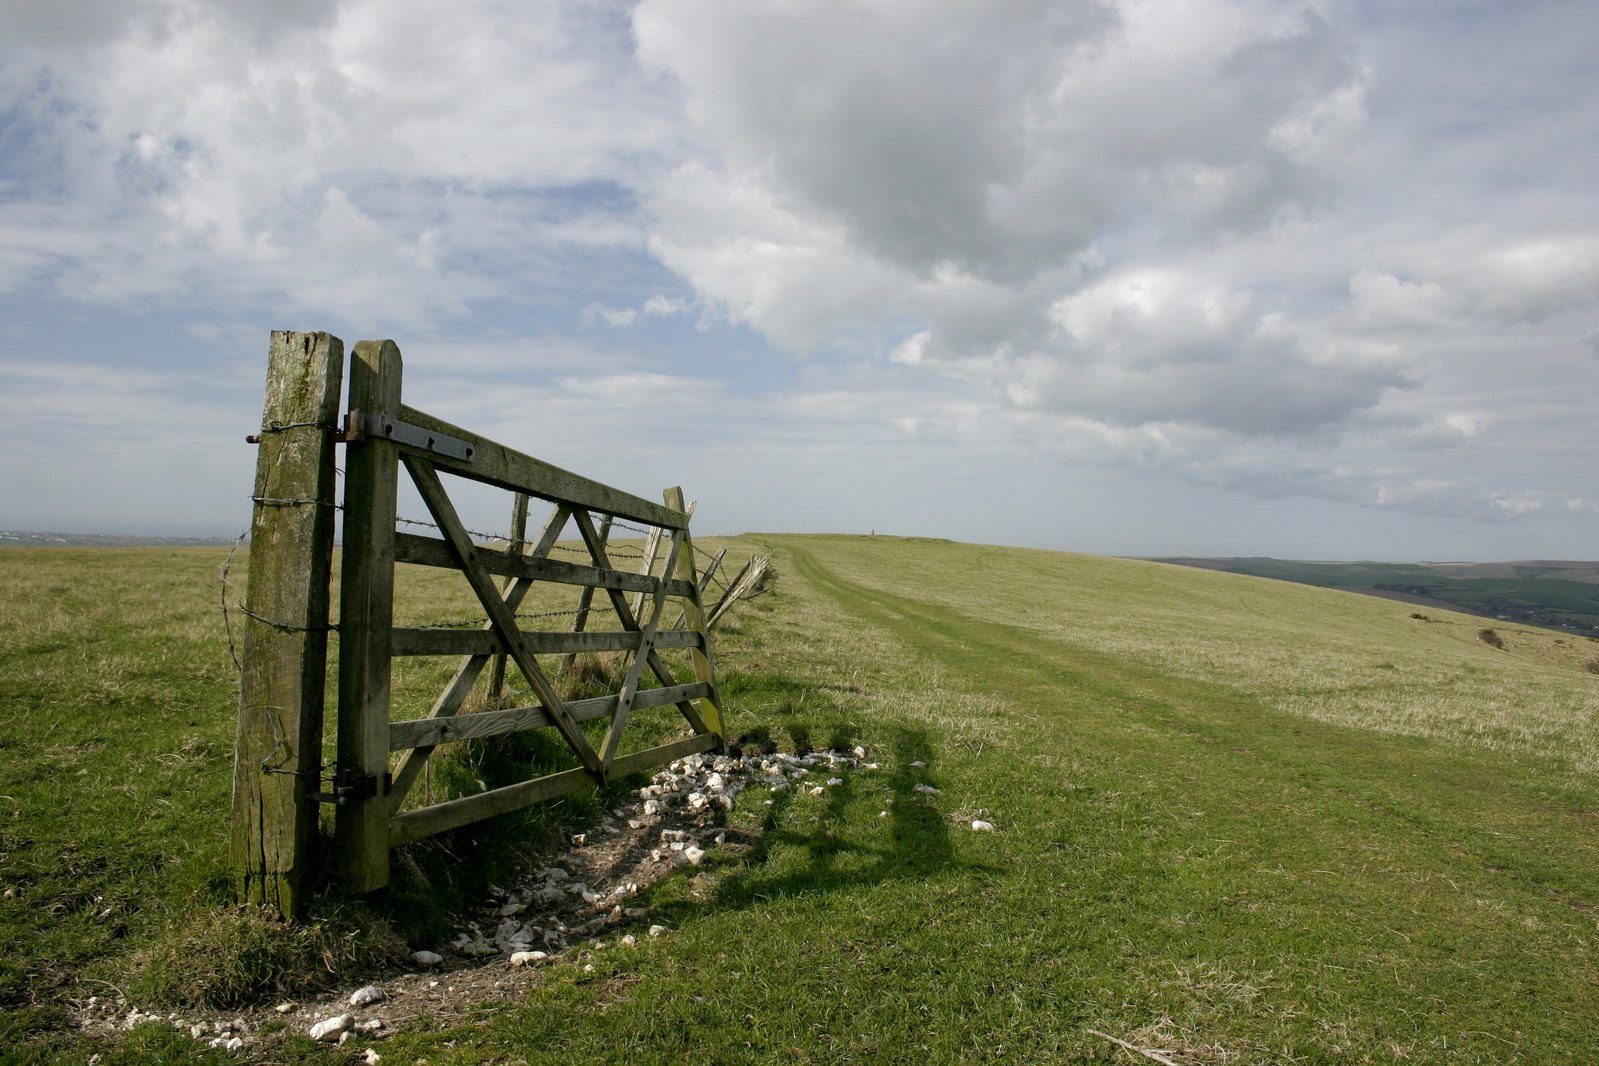 the gate to a small patch of grass on a hill